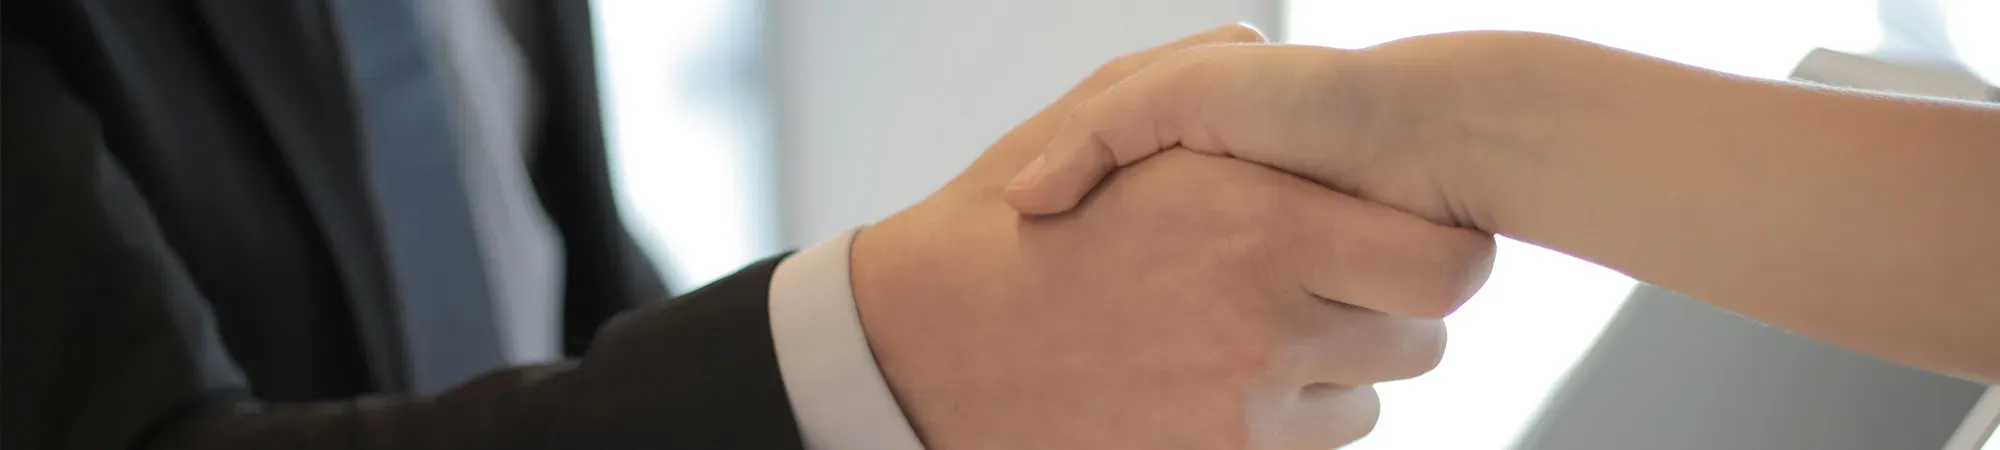 Generic image of two people shaking hands